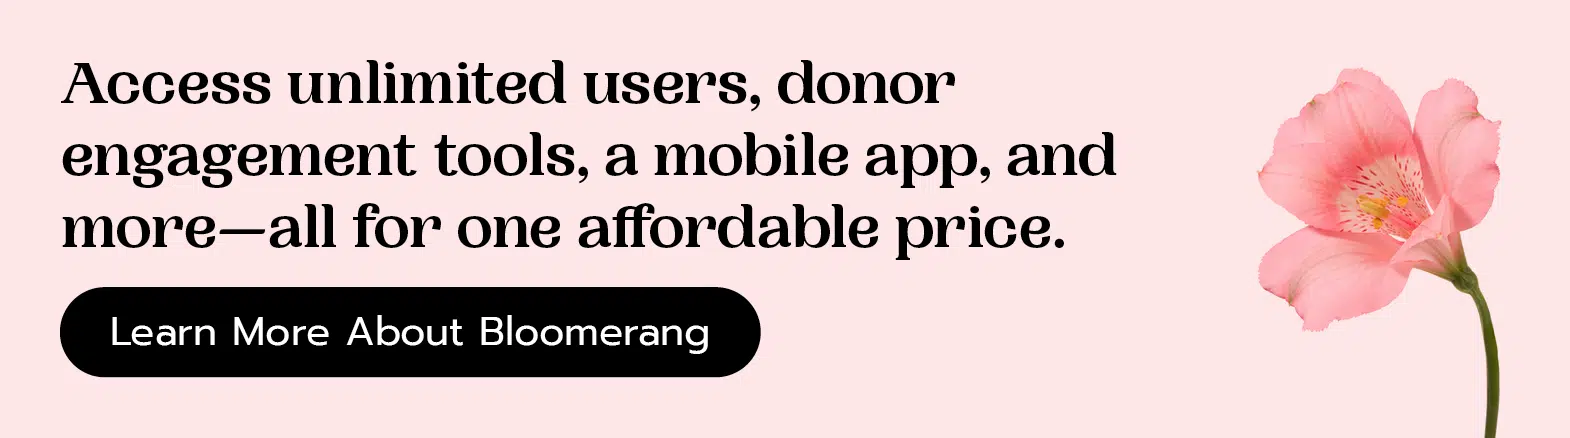 Access unlimited users, donor engagement tools, a mobile app, and more—all for one affordable price. Learn More About Bloomerang.